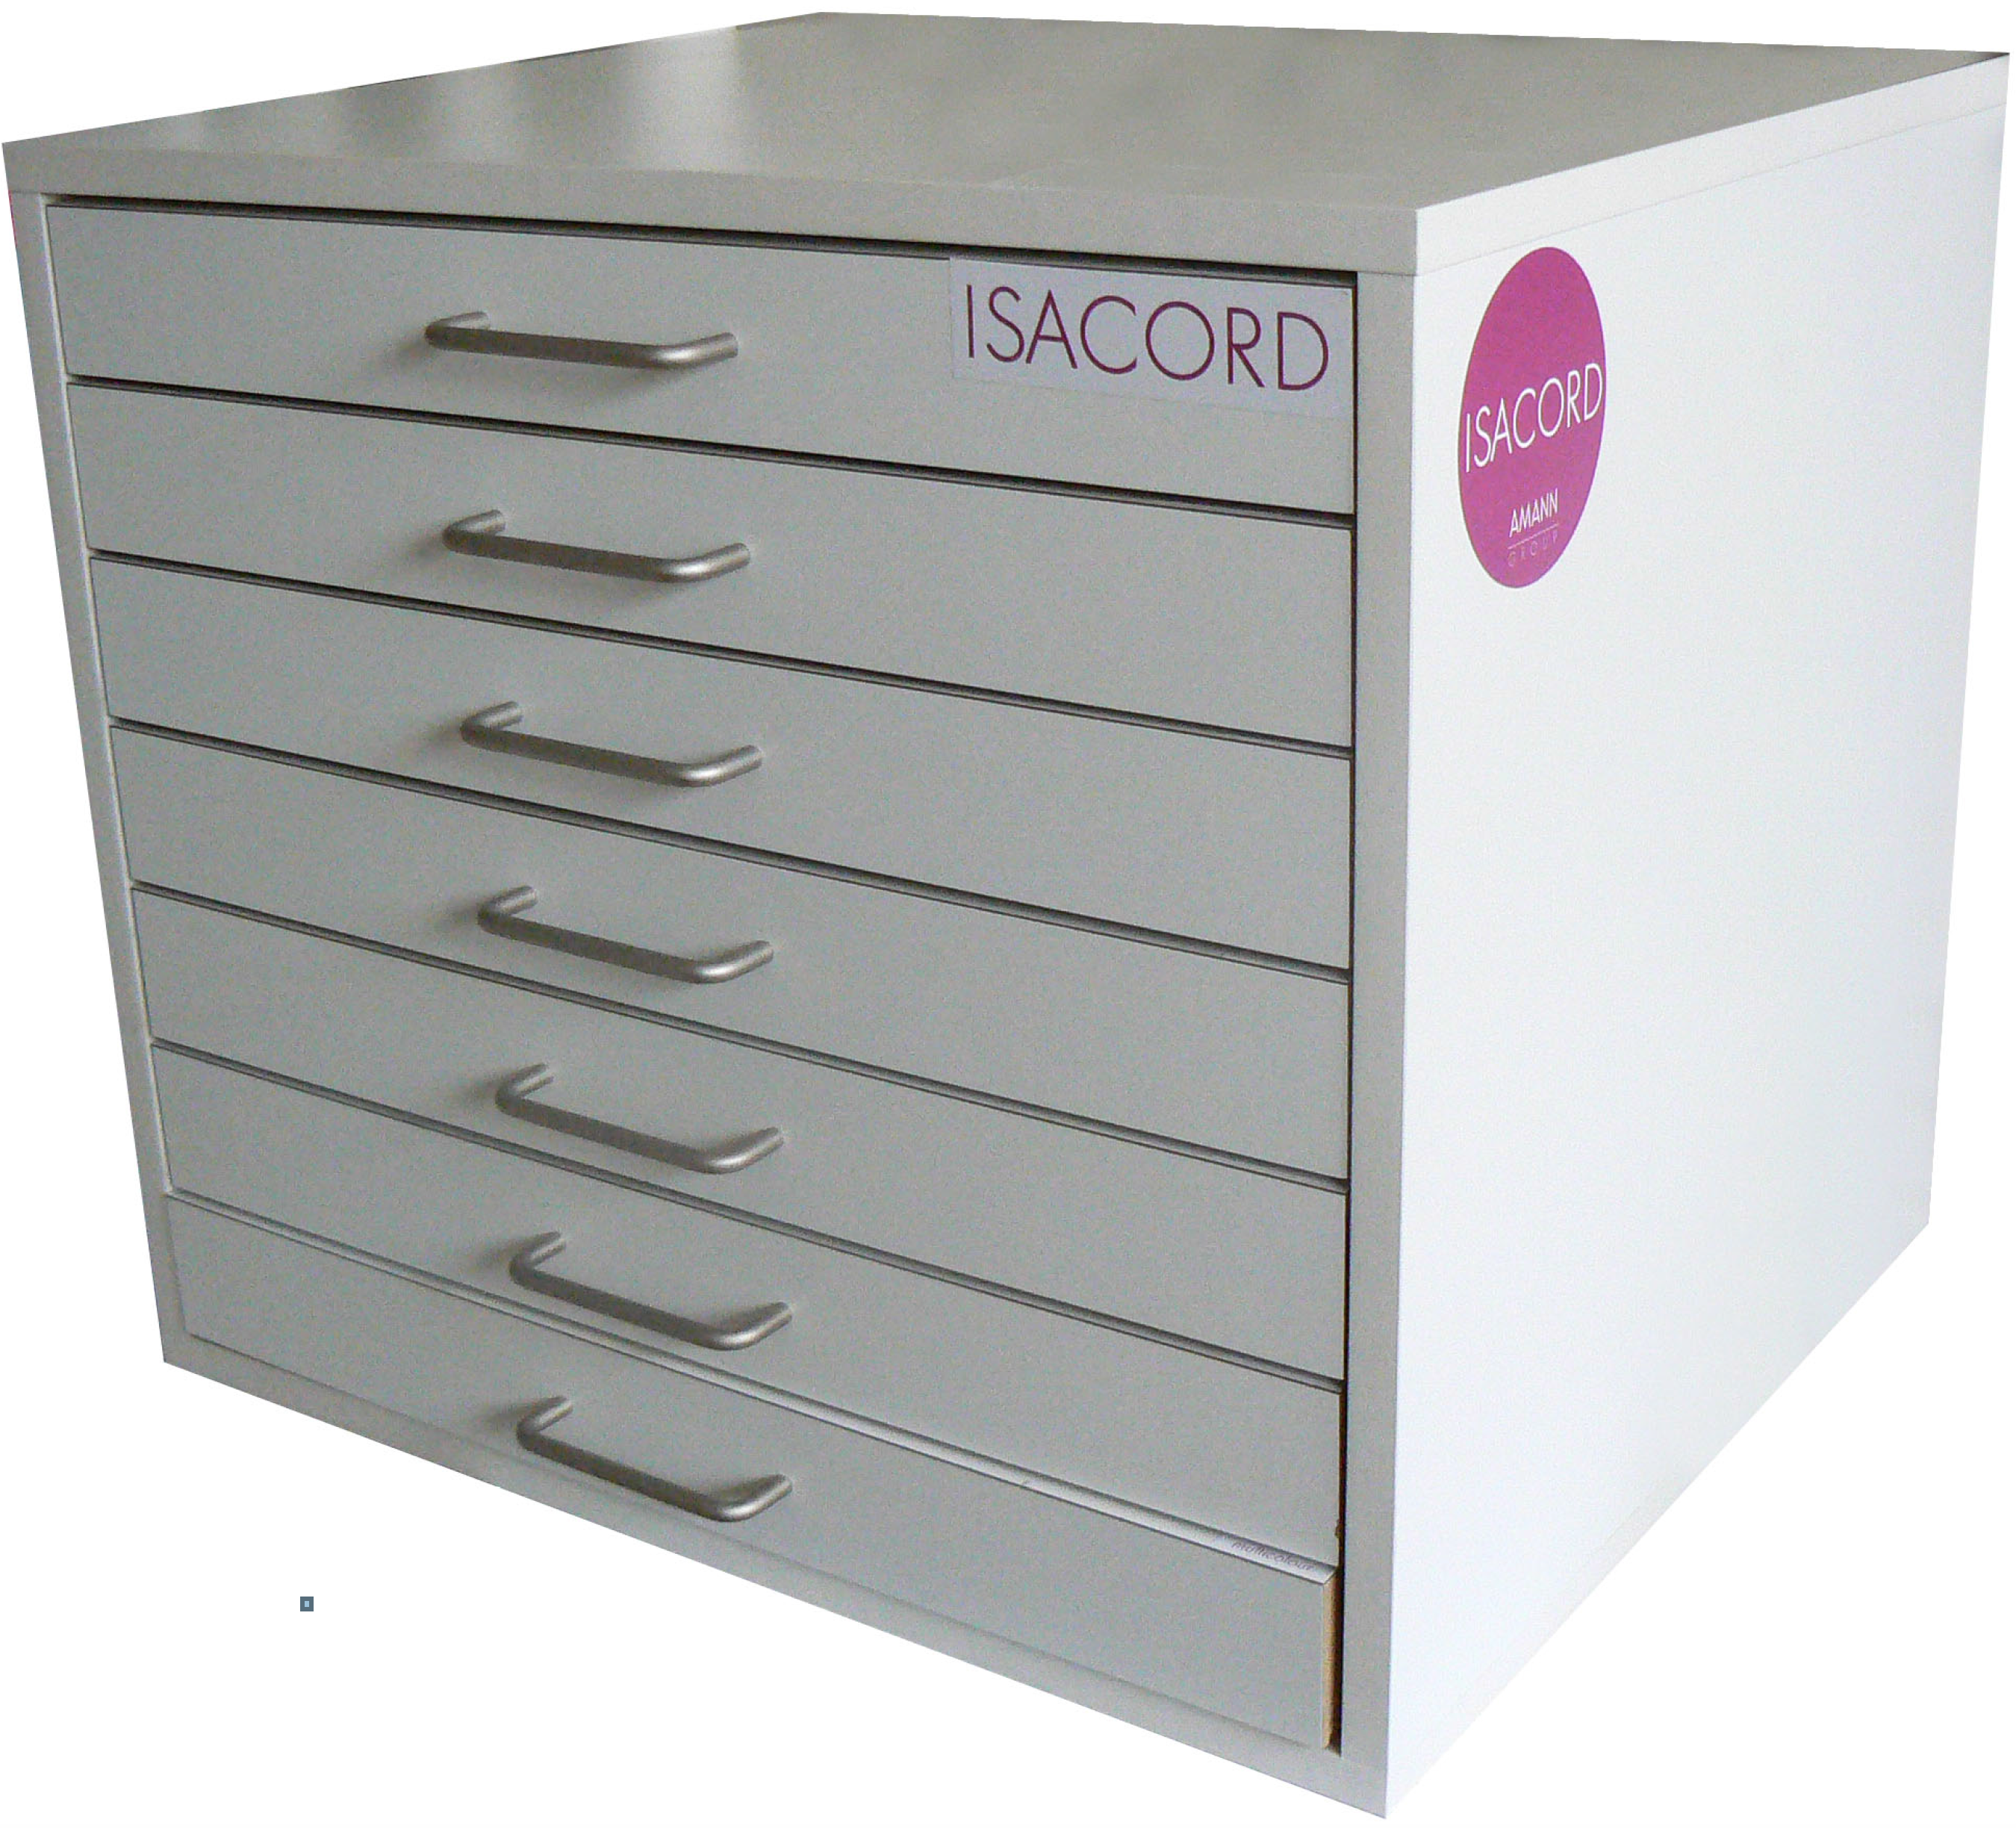 Isacord Full Set In Storage Cabinet Isacord Box Sets Colour